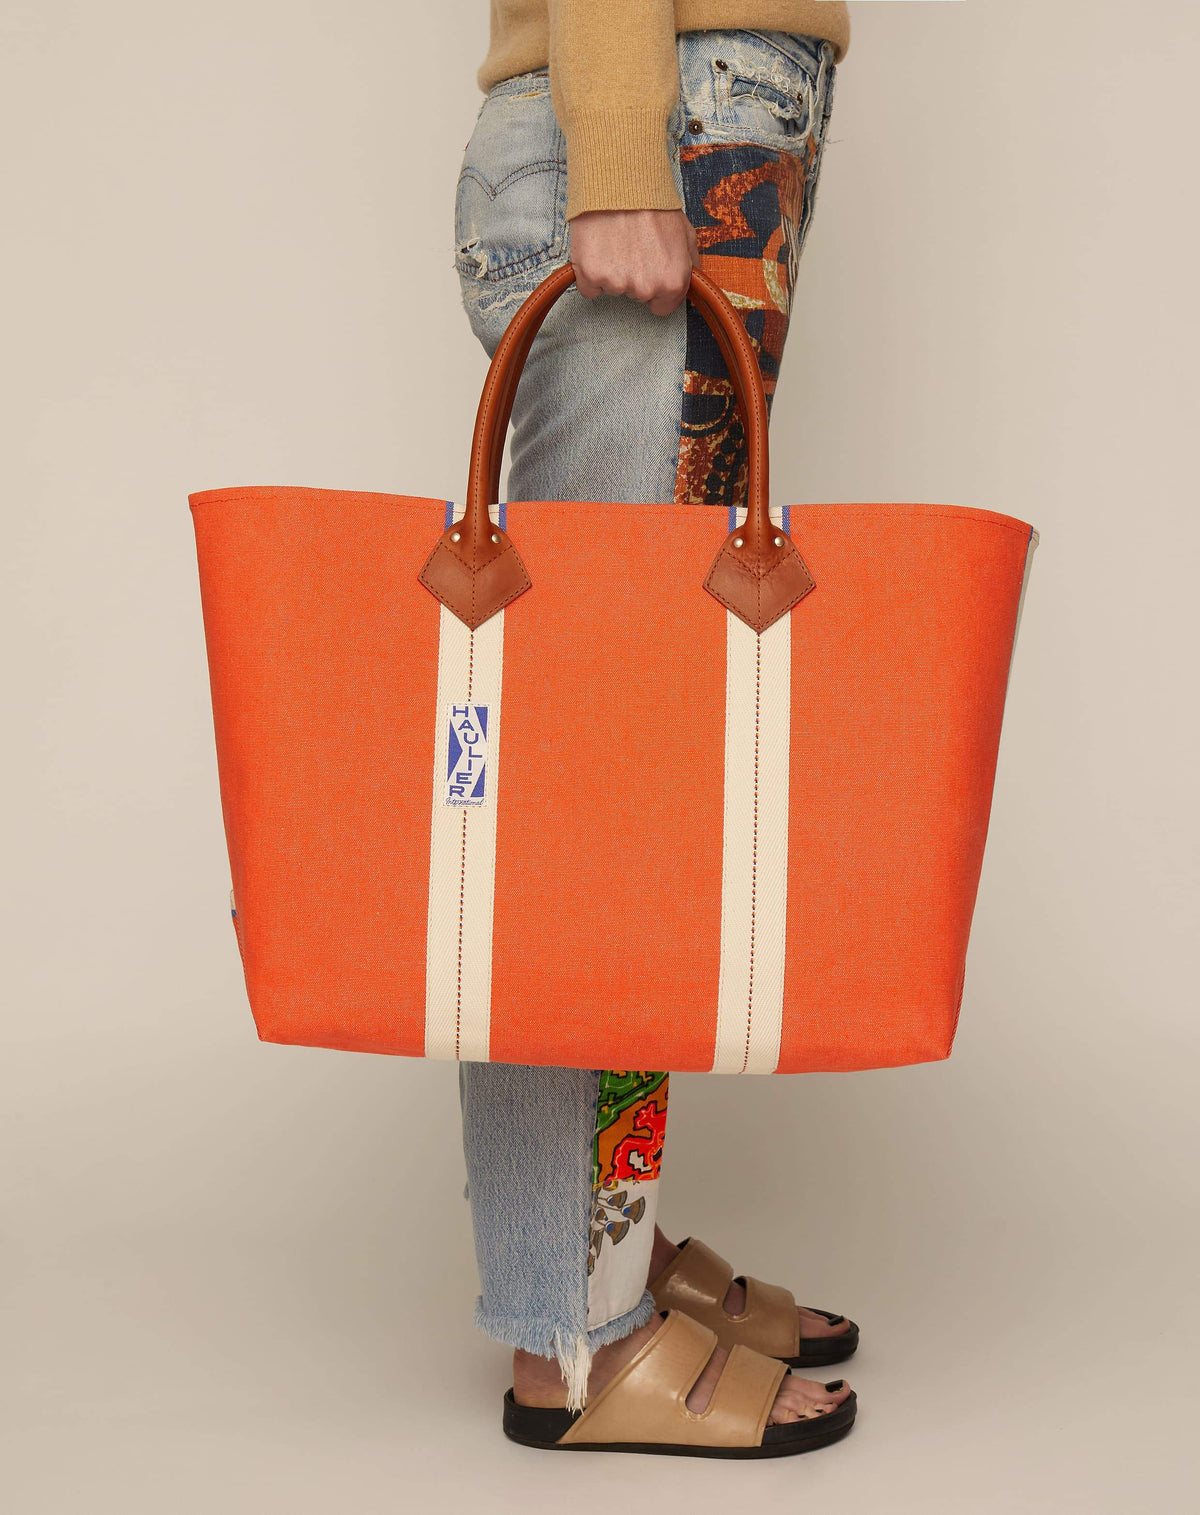 Image of person holding a classic canvas tote bag in bright orange colour with tan leather handles and contrasting natural ecru stripes.